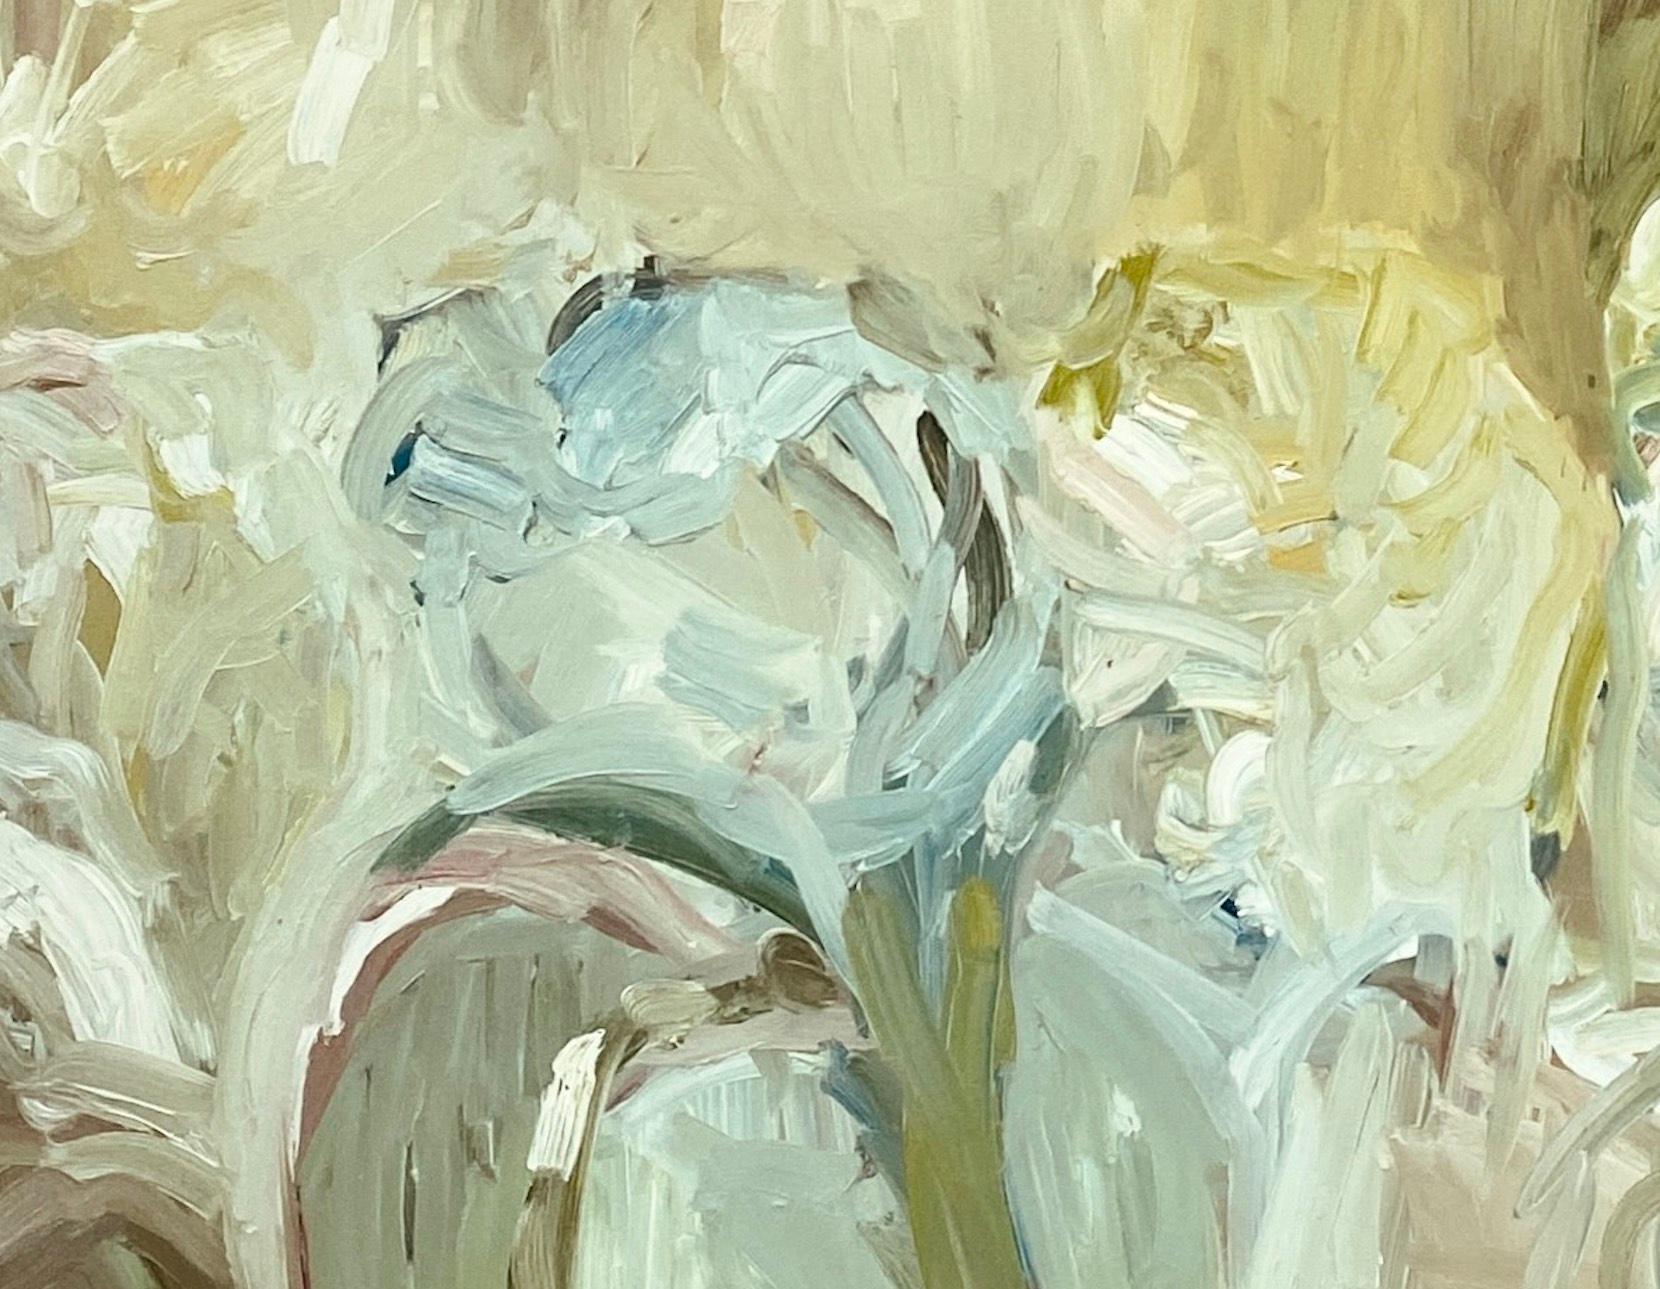 The talent of Francesca Owen really shines through in this beautiful statement piece. Her use of palette is subtle and her brushwork is able to move the paint over the canvas to create this sublime work. Francesca's paintings are attracting a lot of